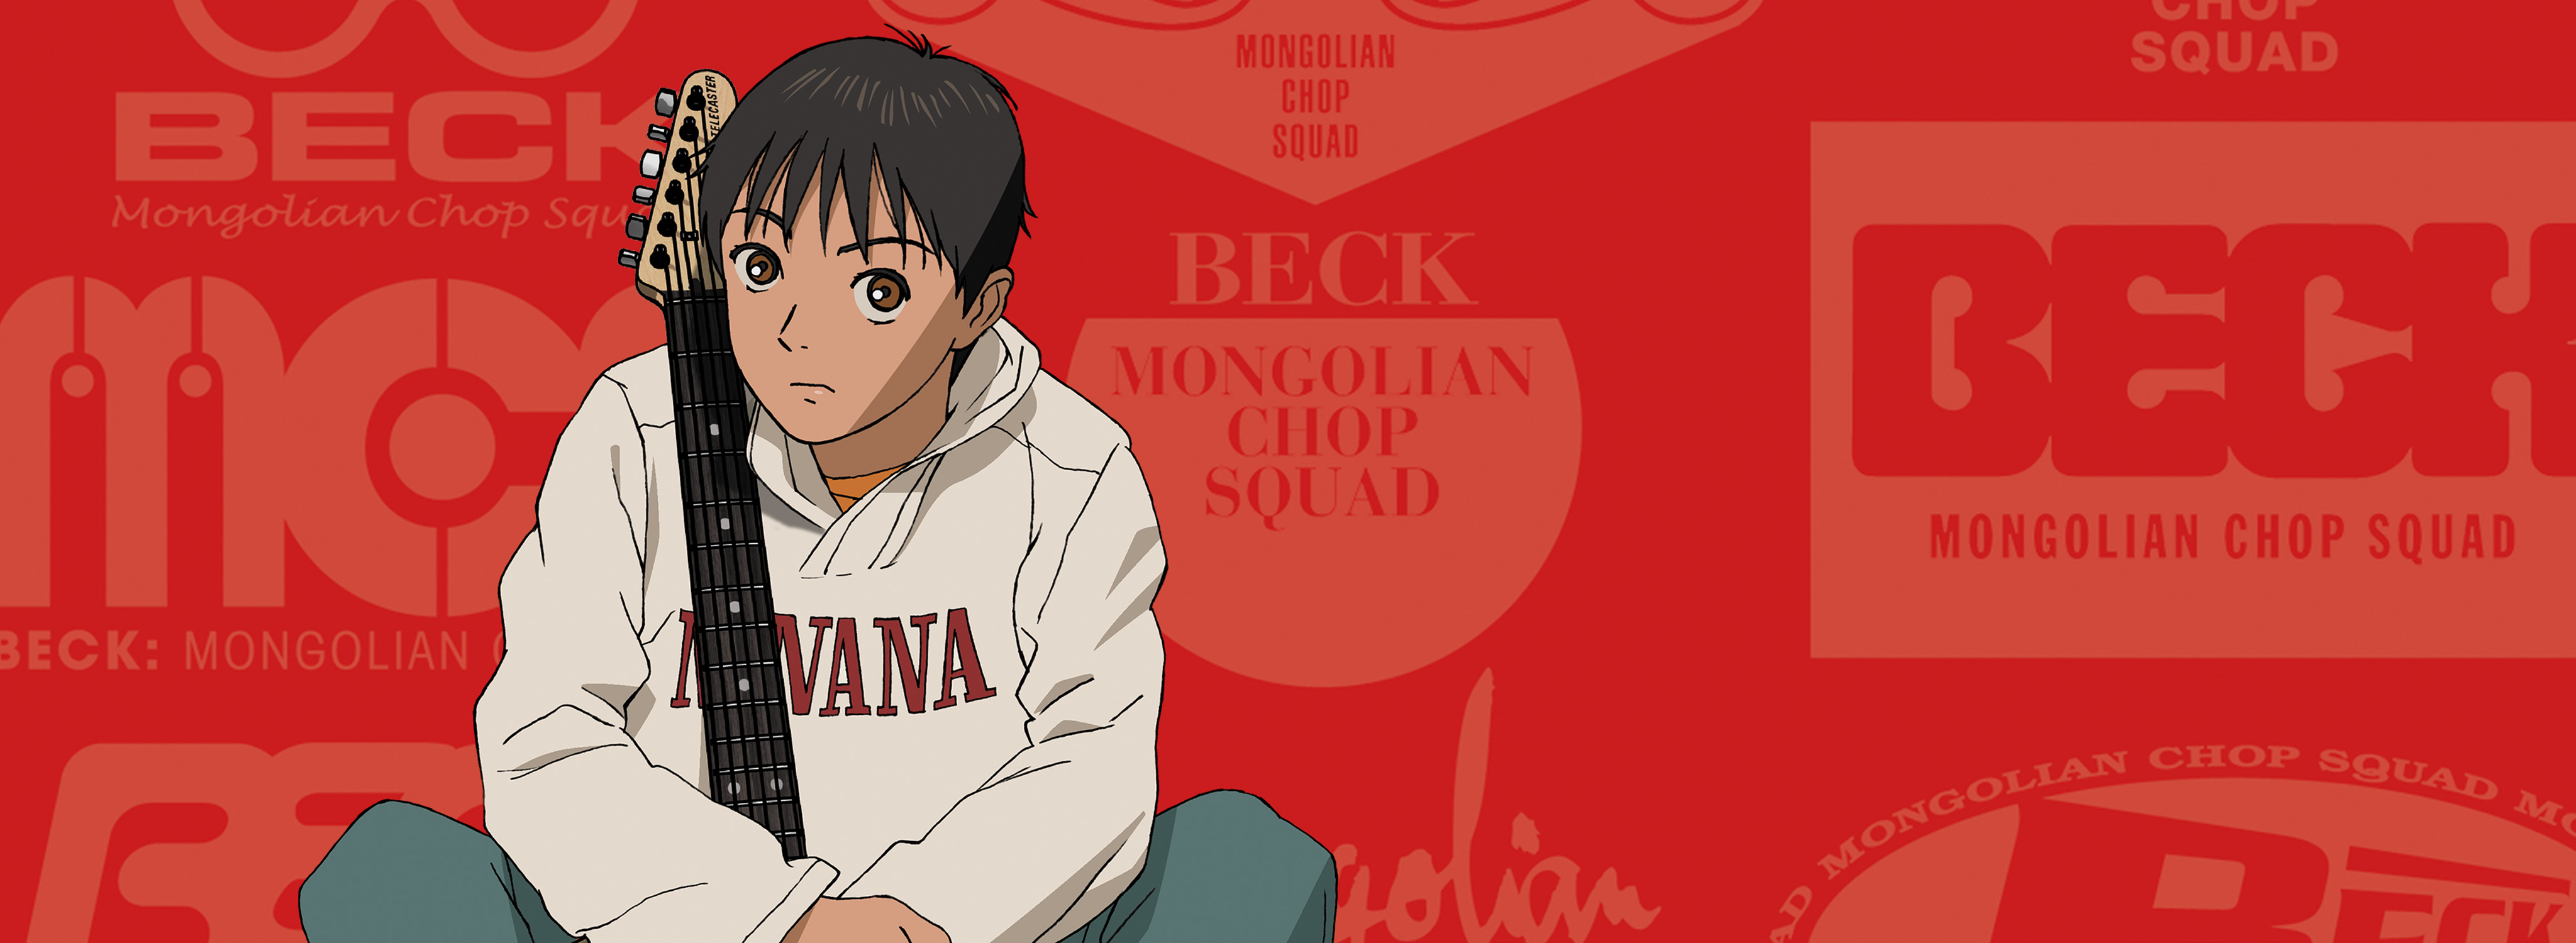 Beck Mongolian Chop Squad Wallpapers